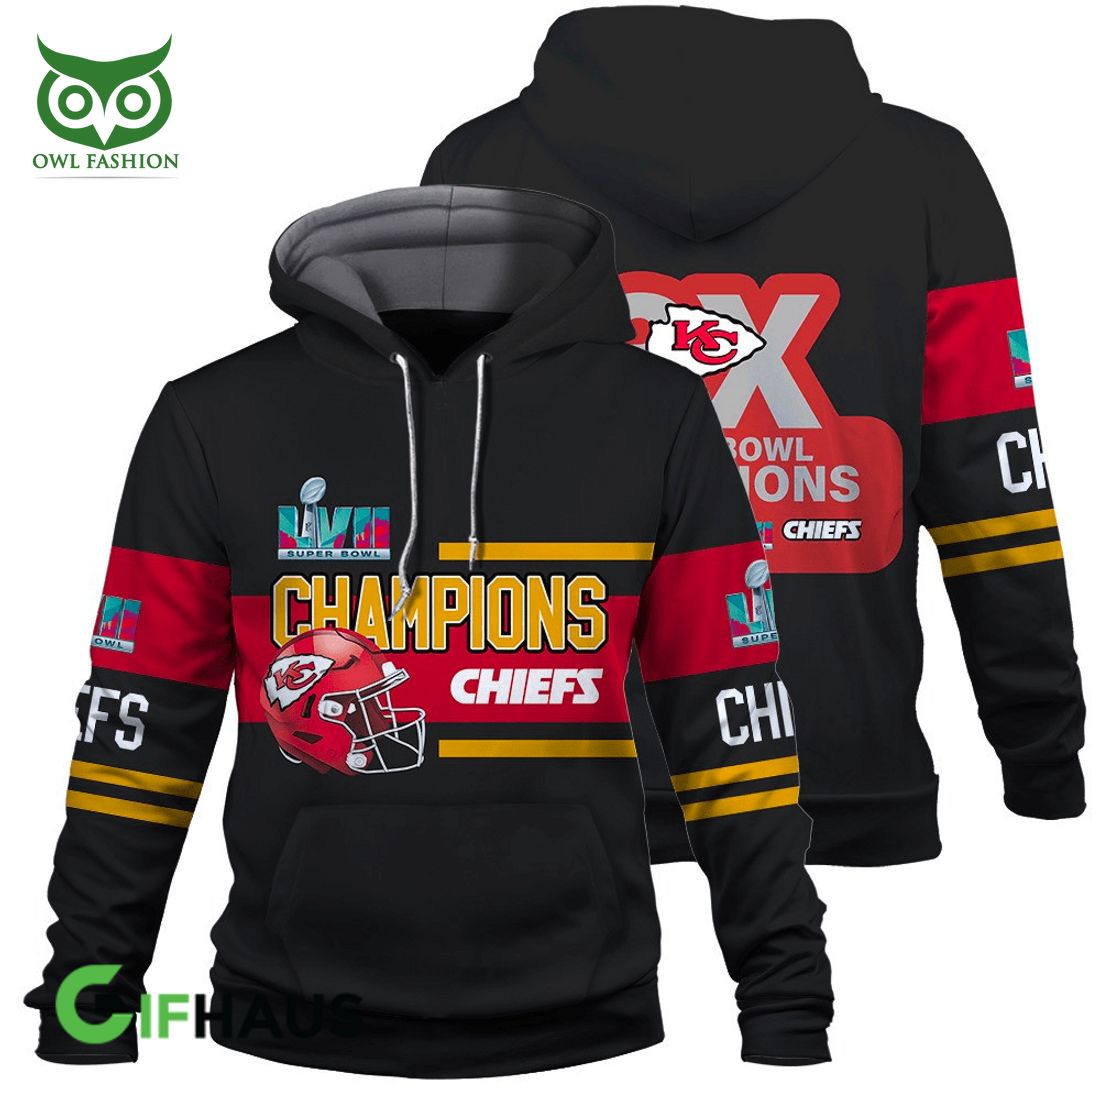 Chiefs are Super Bowl champions! Celebrate with new merchandise, shirts,  and more - Arrowhead Pride